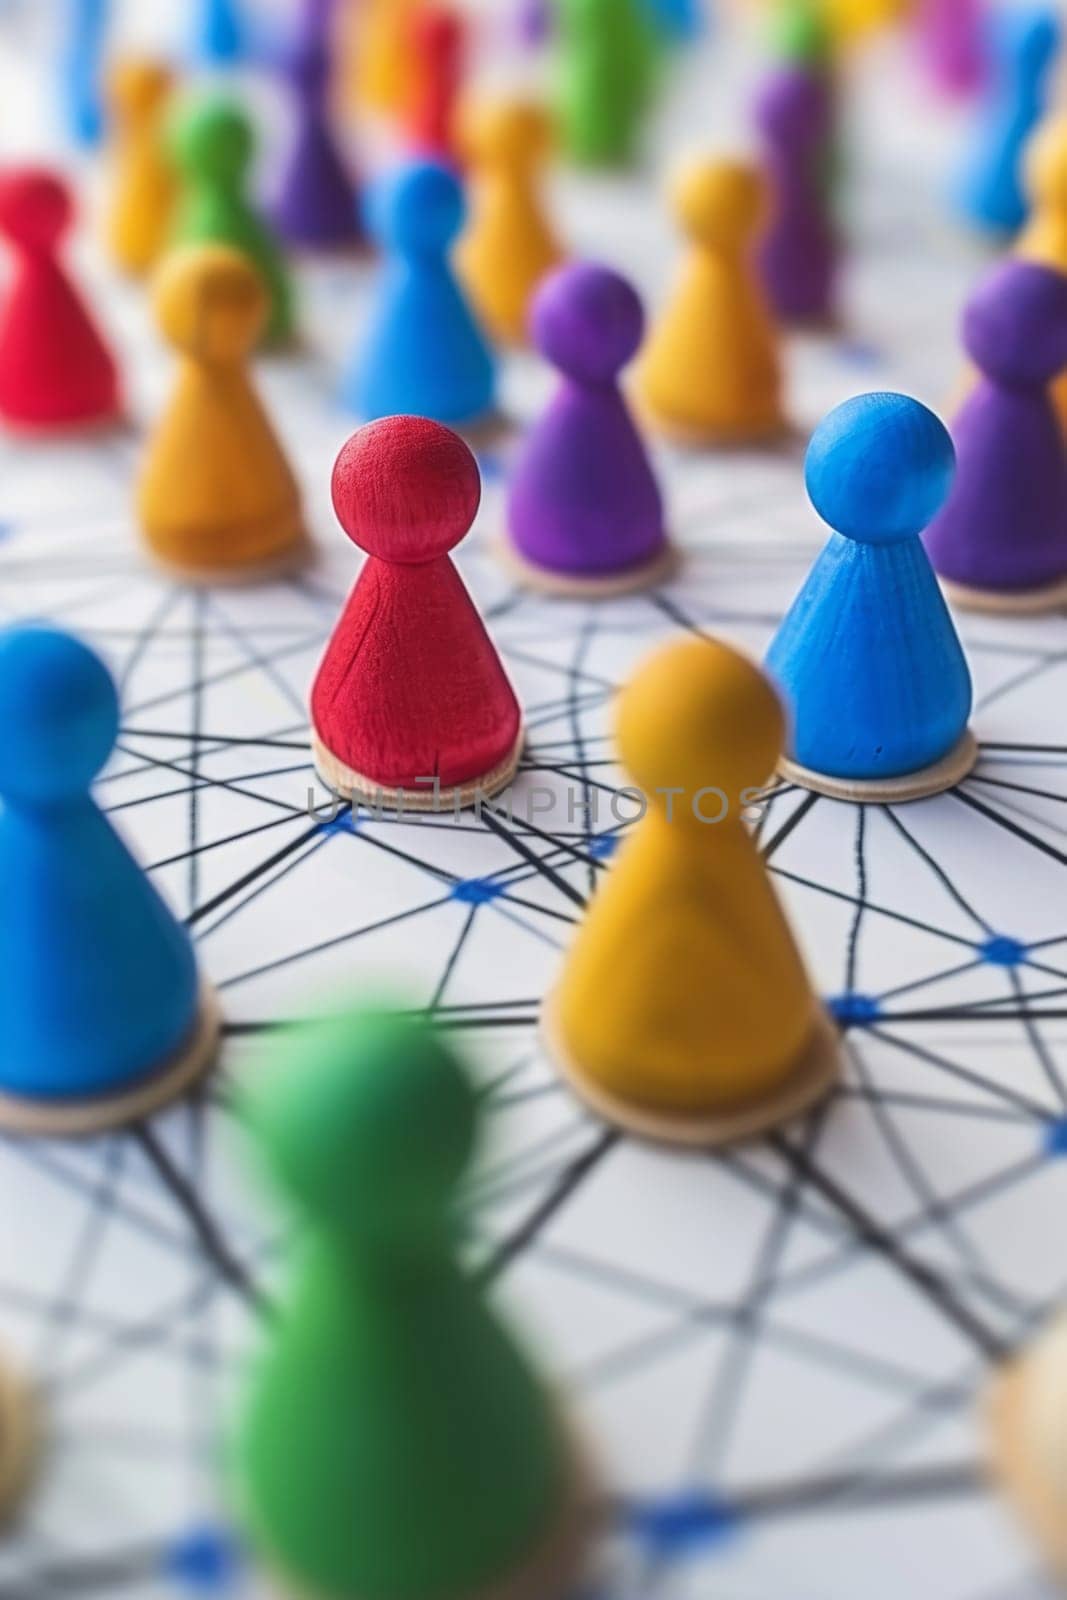 the social network community team. The concept of connections between people.